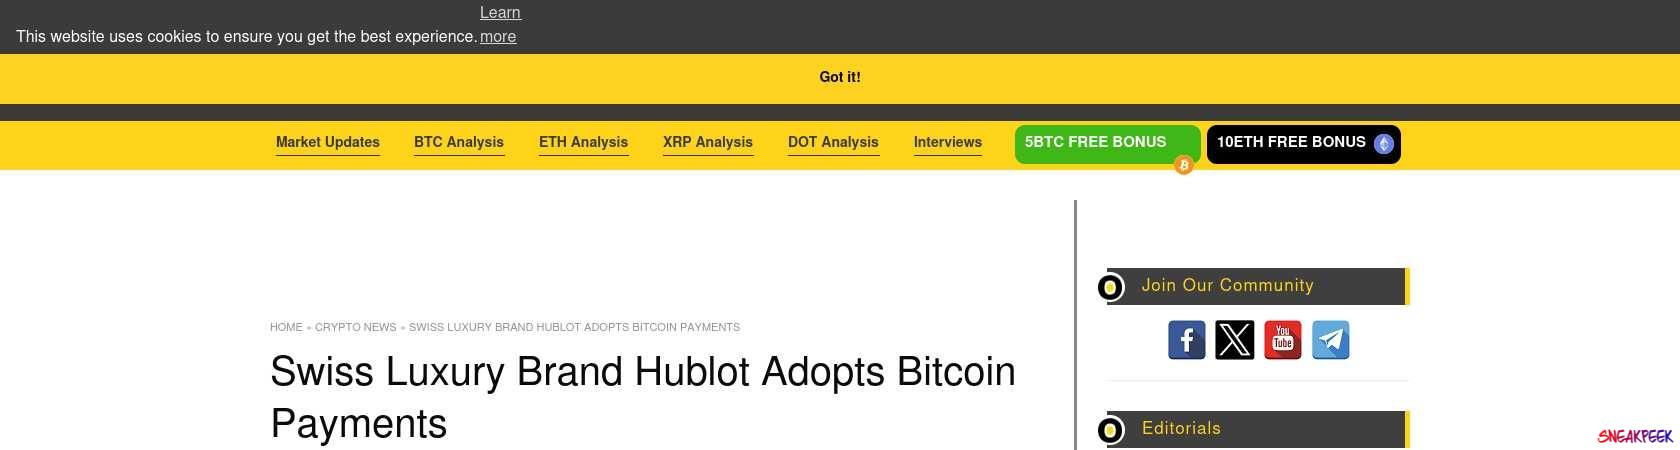 Read the full Article:  ⭲ Swiss Luxury Brand Hublot Adopts Bitcoin Payments